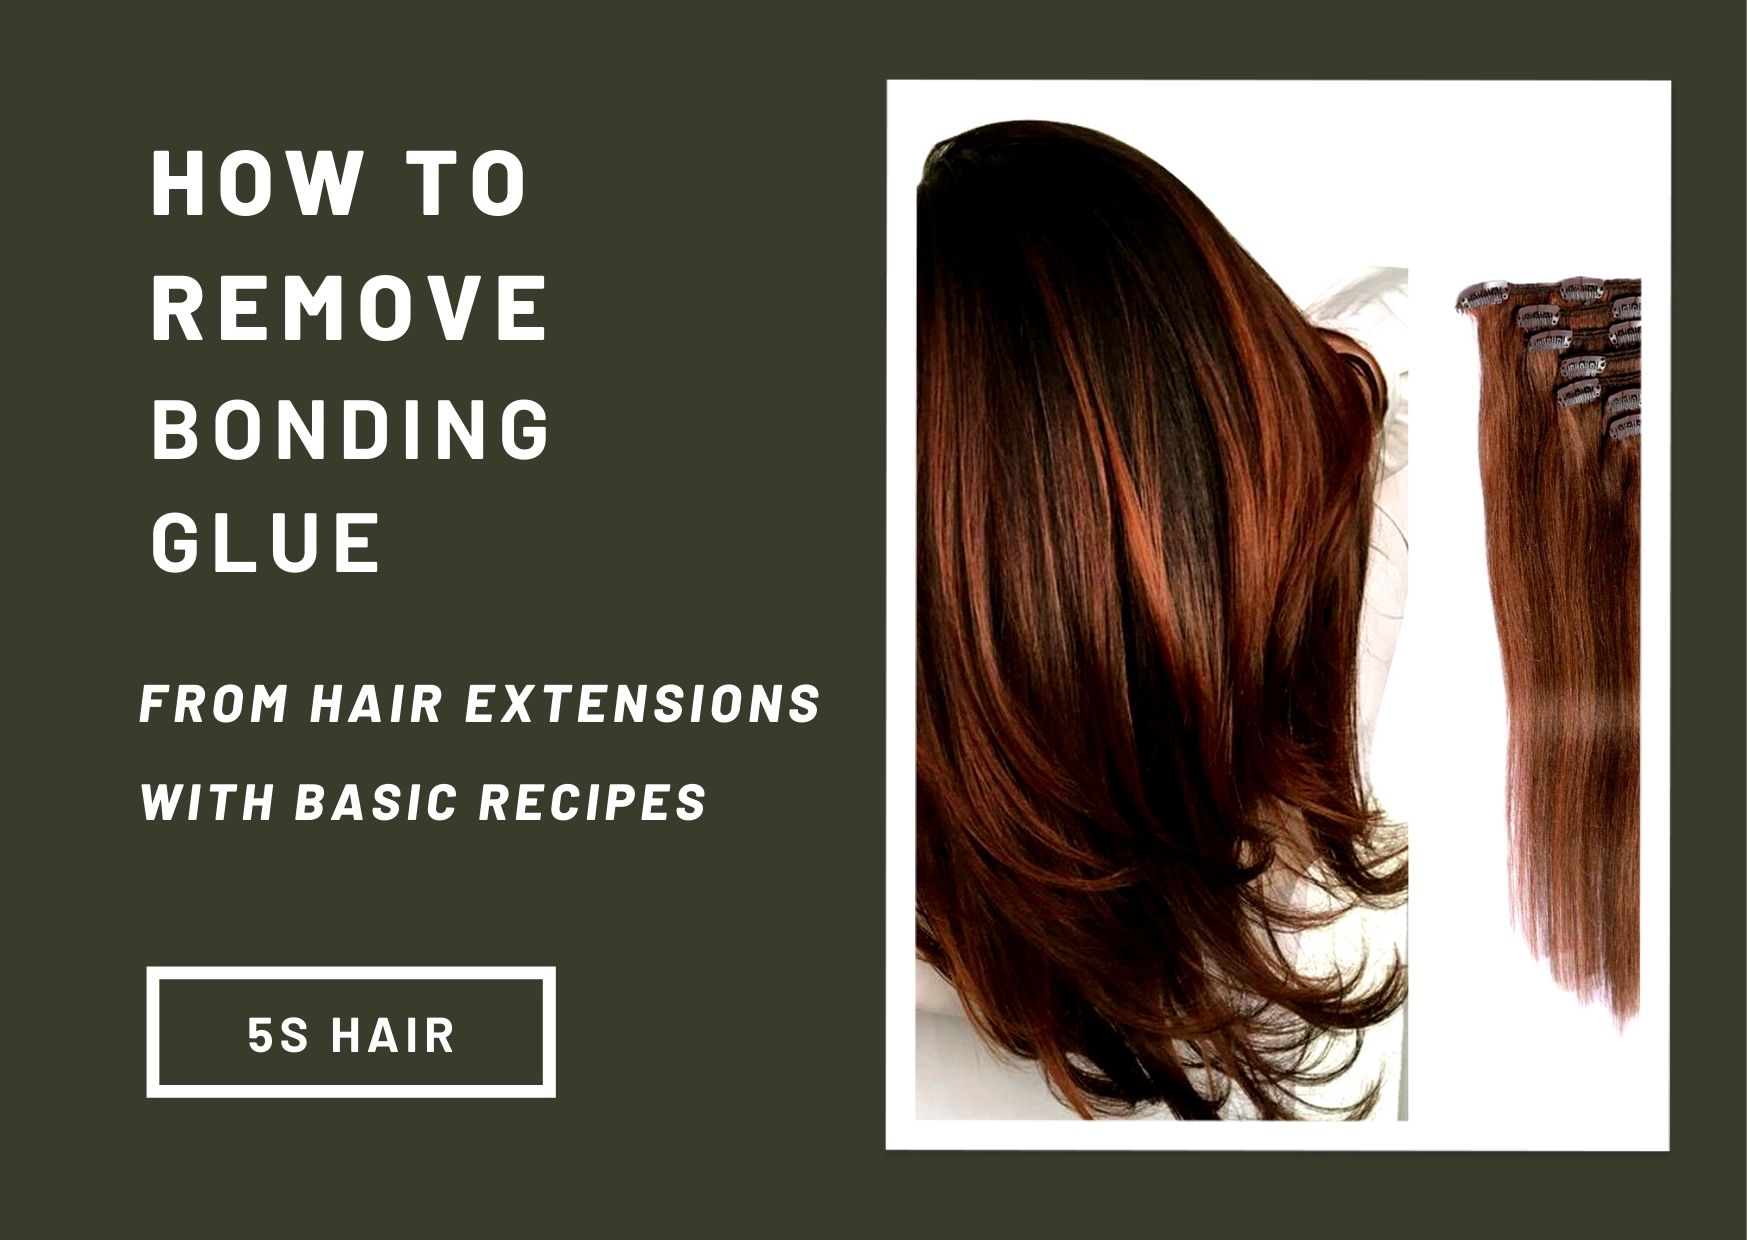 How to remove bonding glue from hair extensions with basic recipes